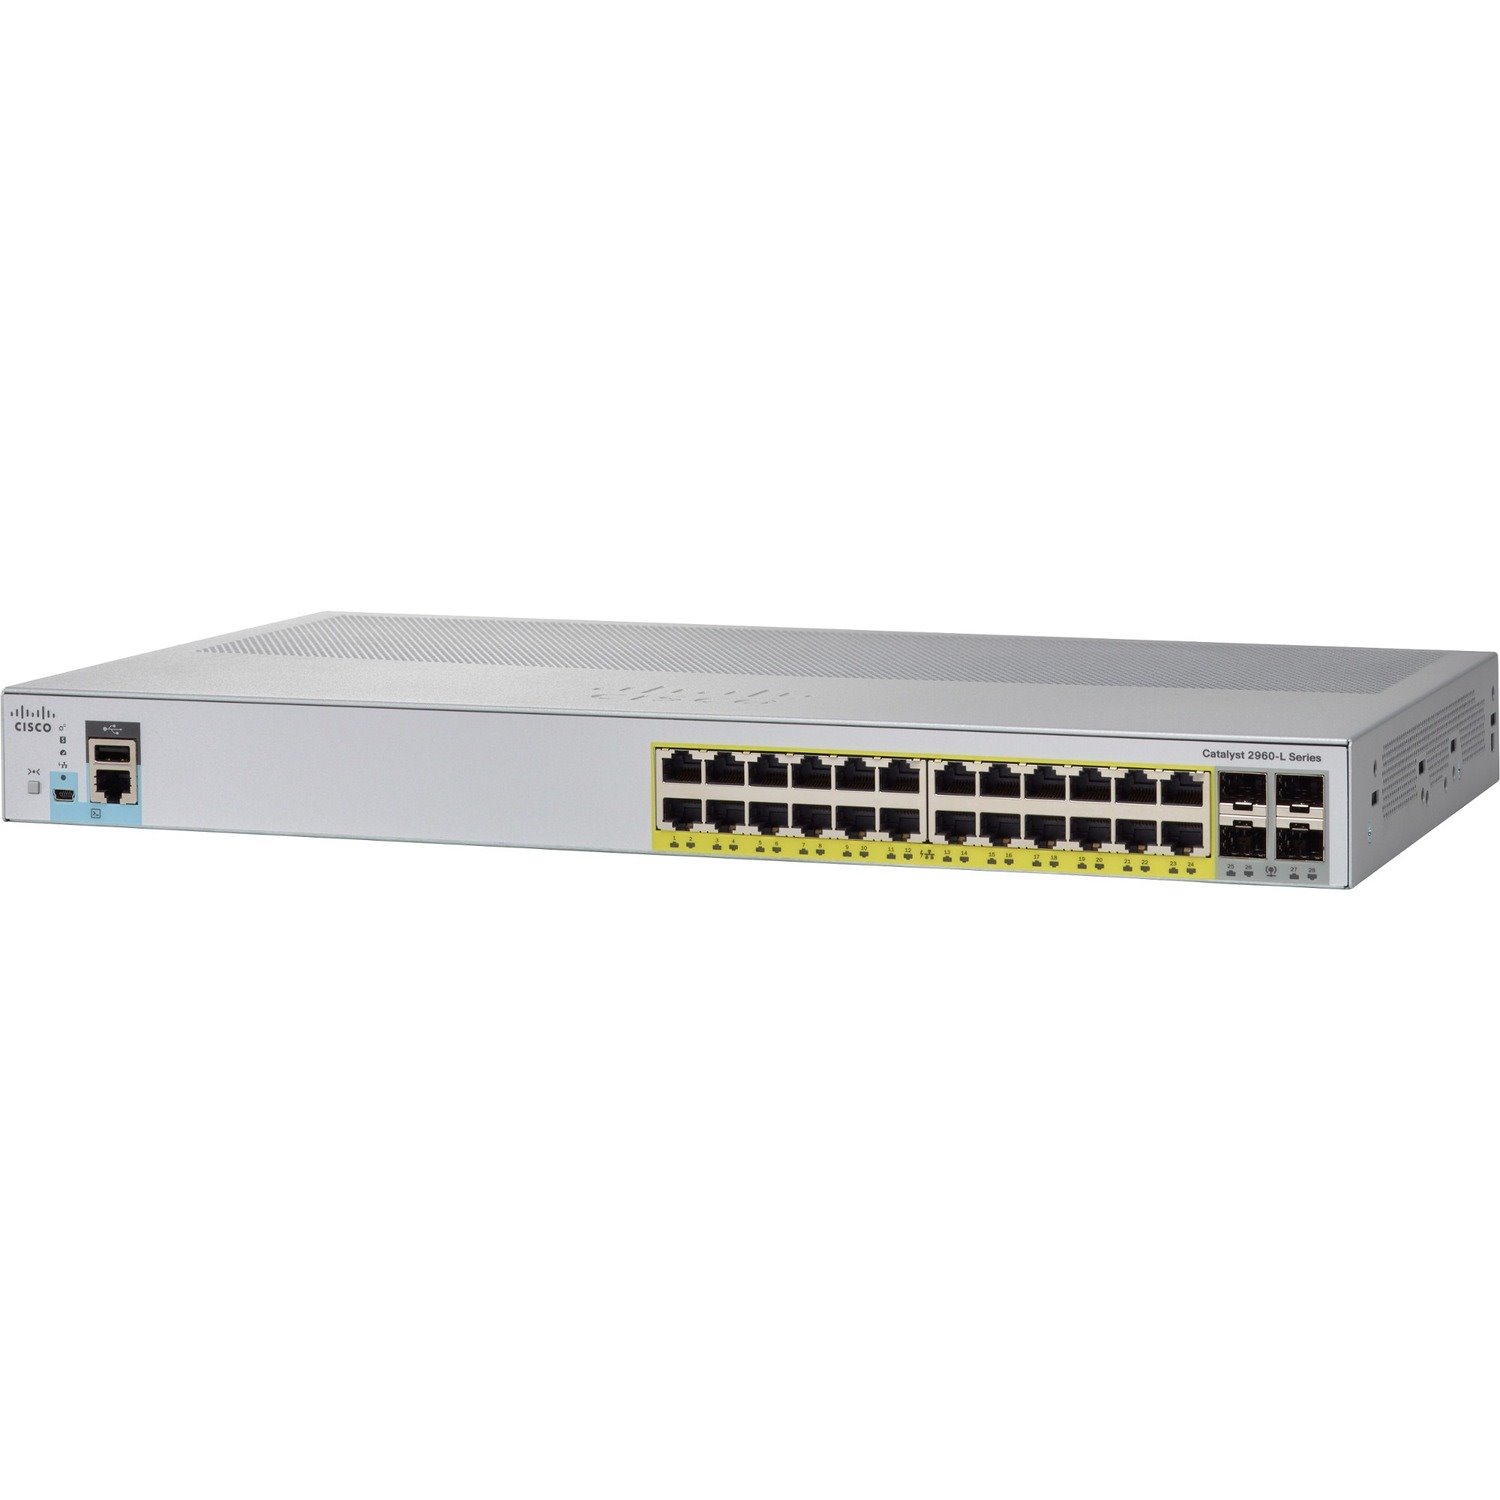 Cisco Catalyst WS-C2960L-24PS-LL Ethernet Switch